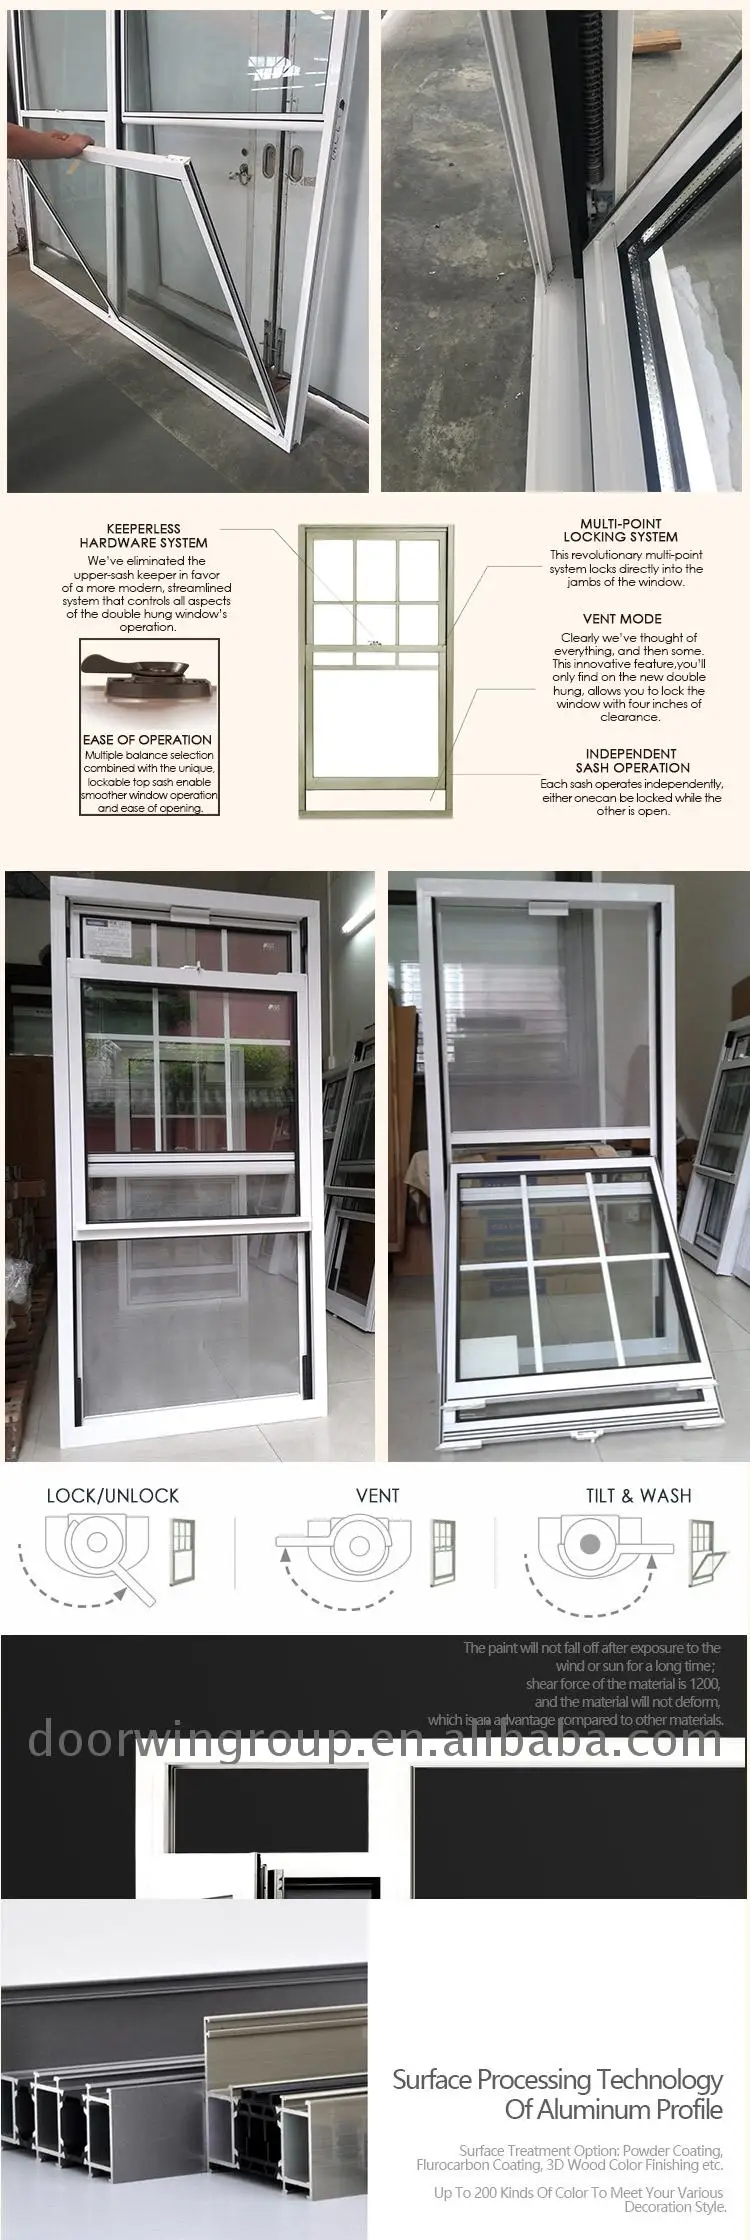 lower price Australia Arch vinyl small double pane Soundproof Aluminum  timber double hung windows